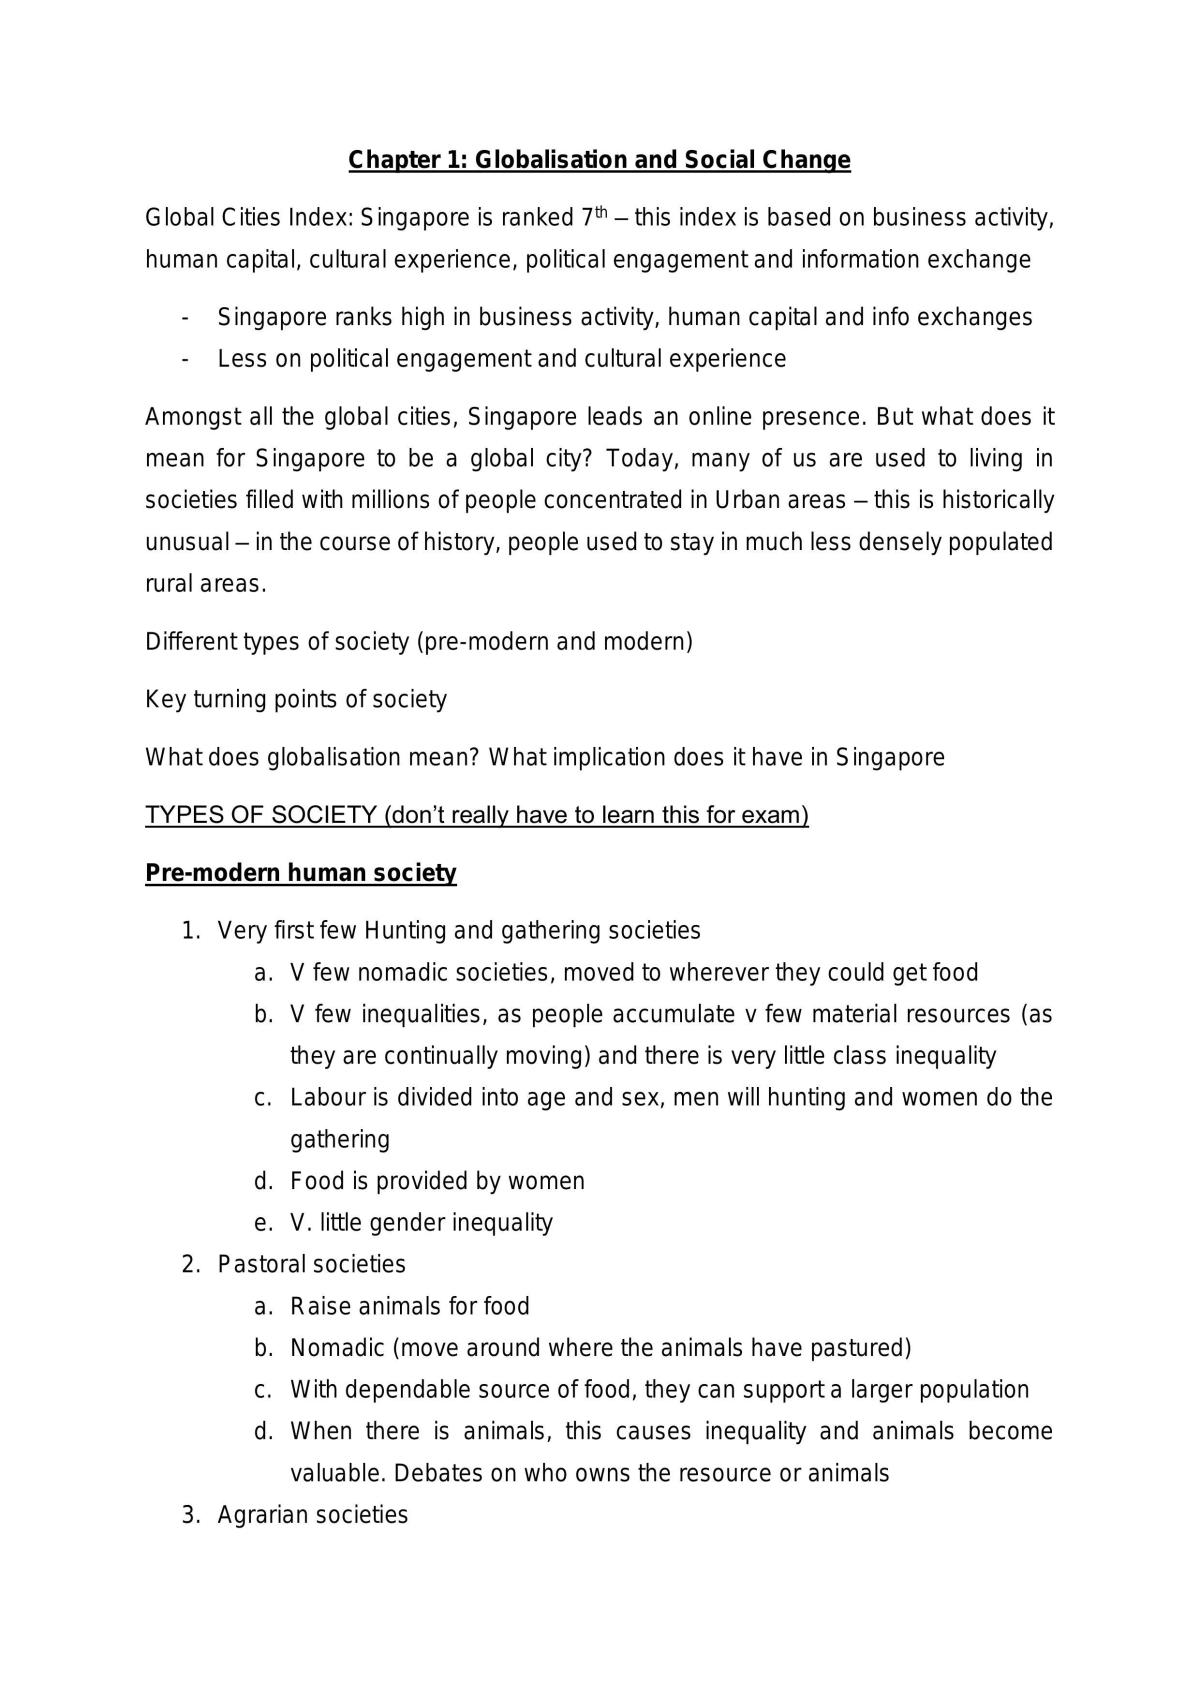 GES1028 Singapore Society Complete Notes - Page 1